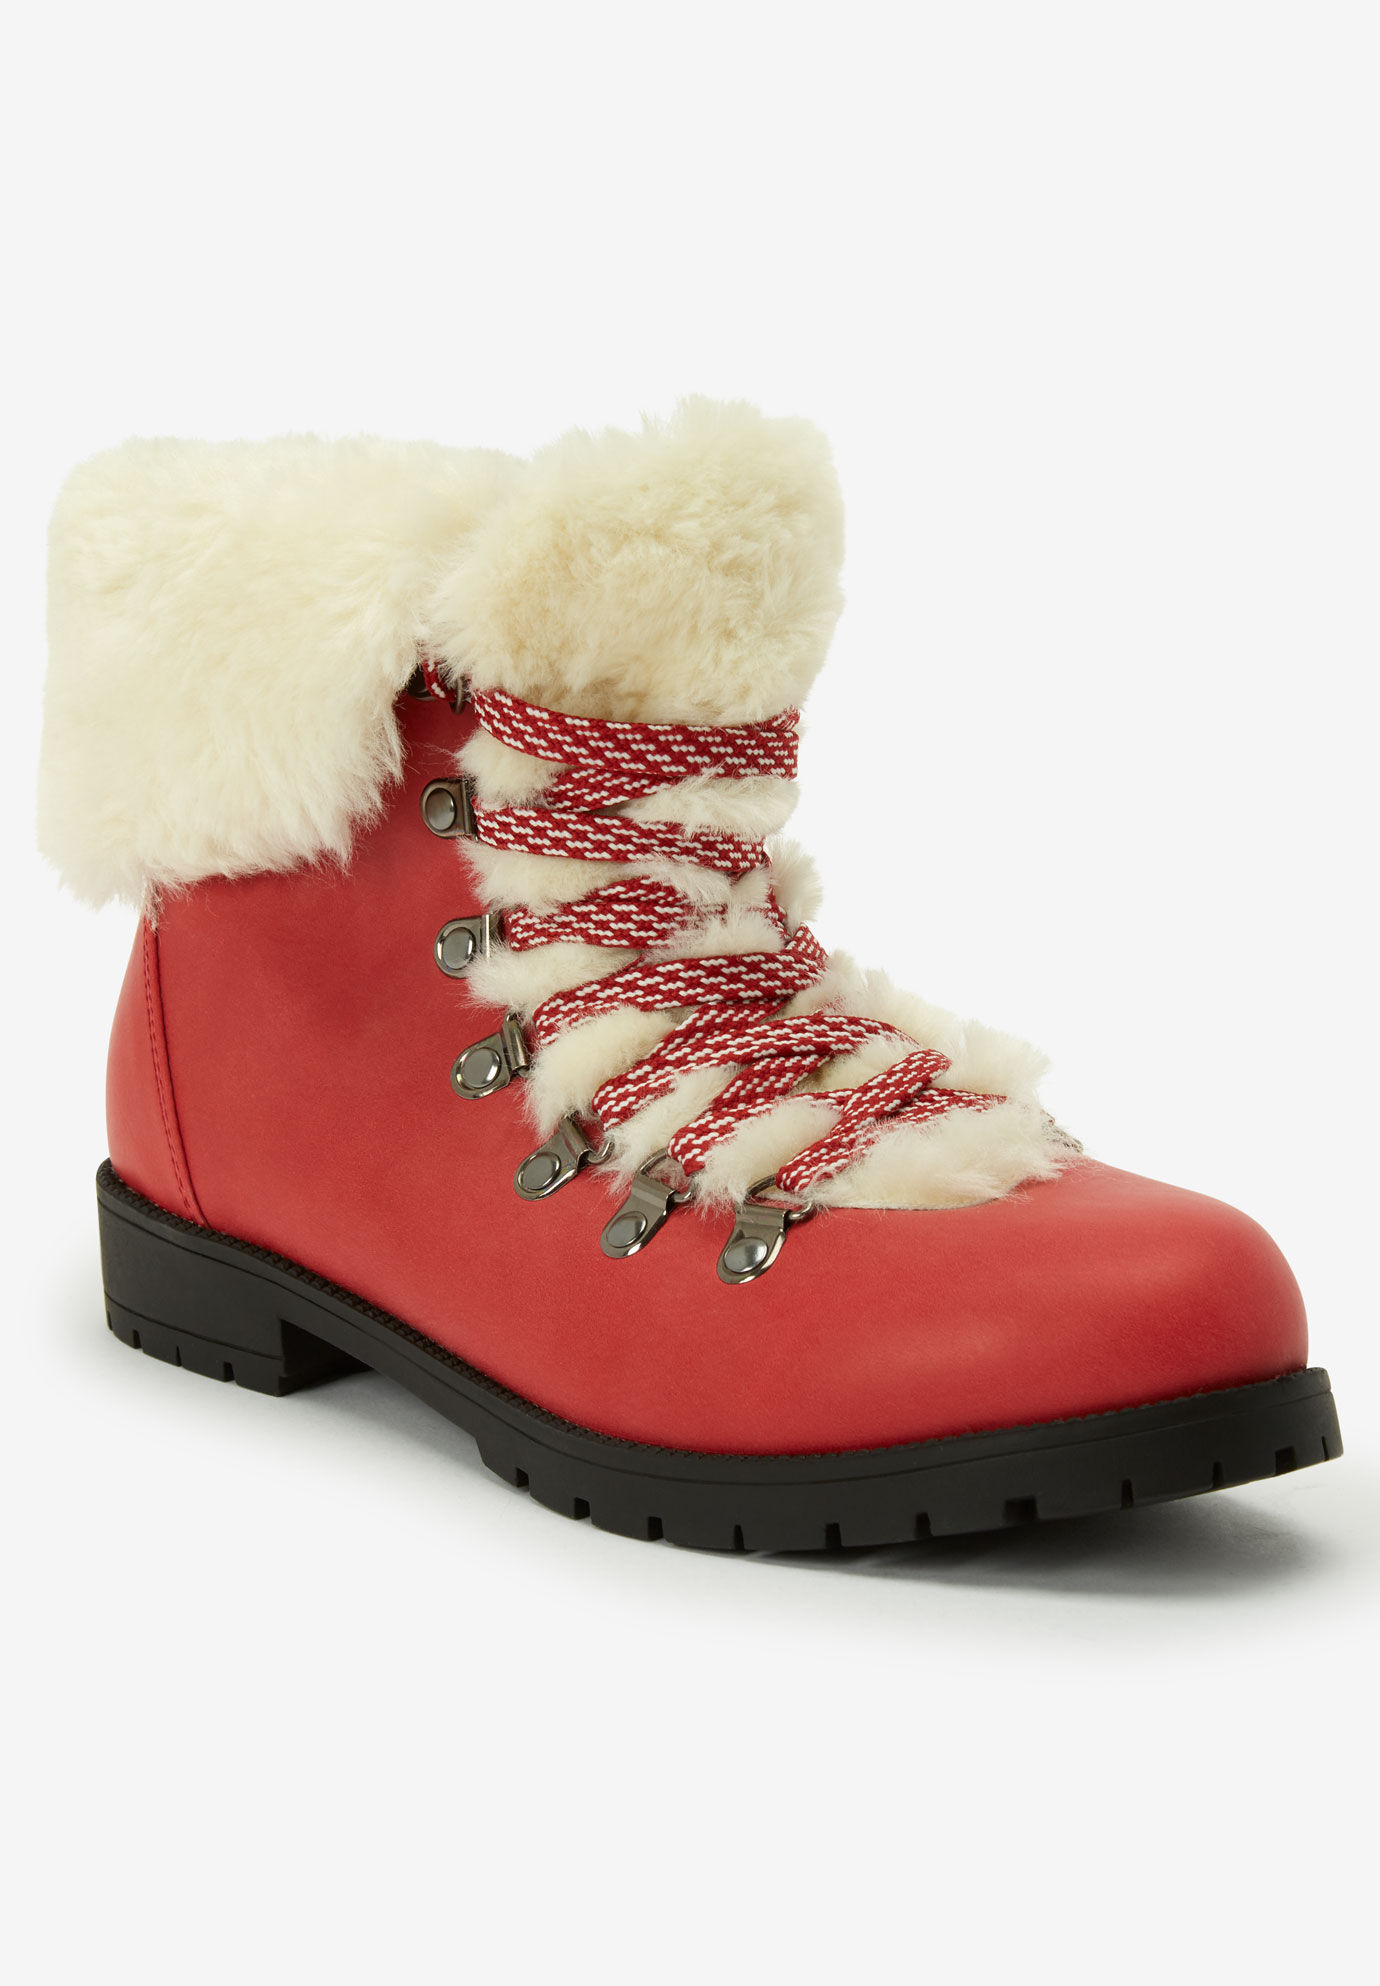 snow boots wide width womens